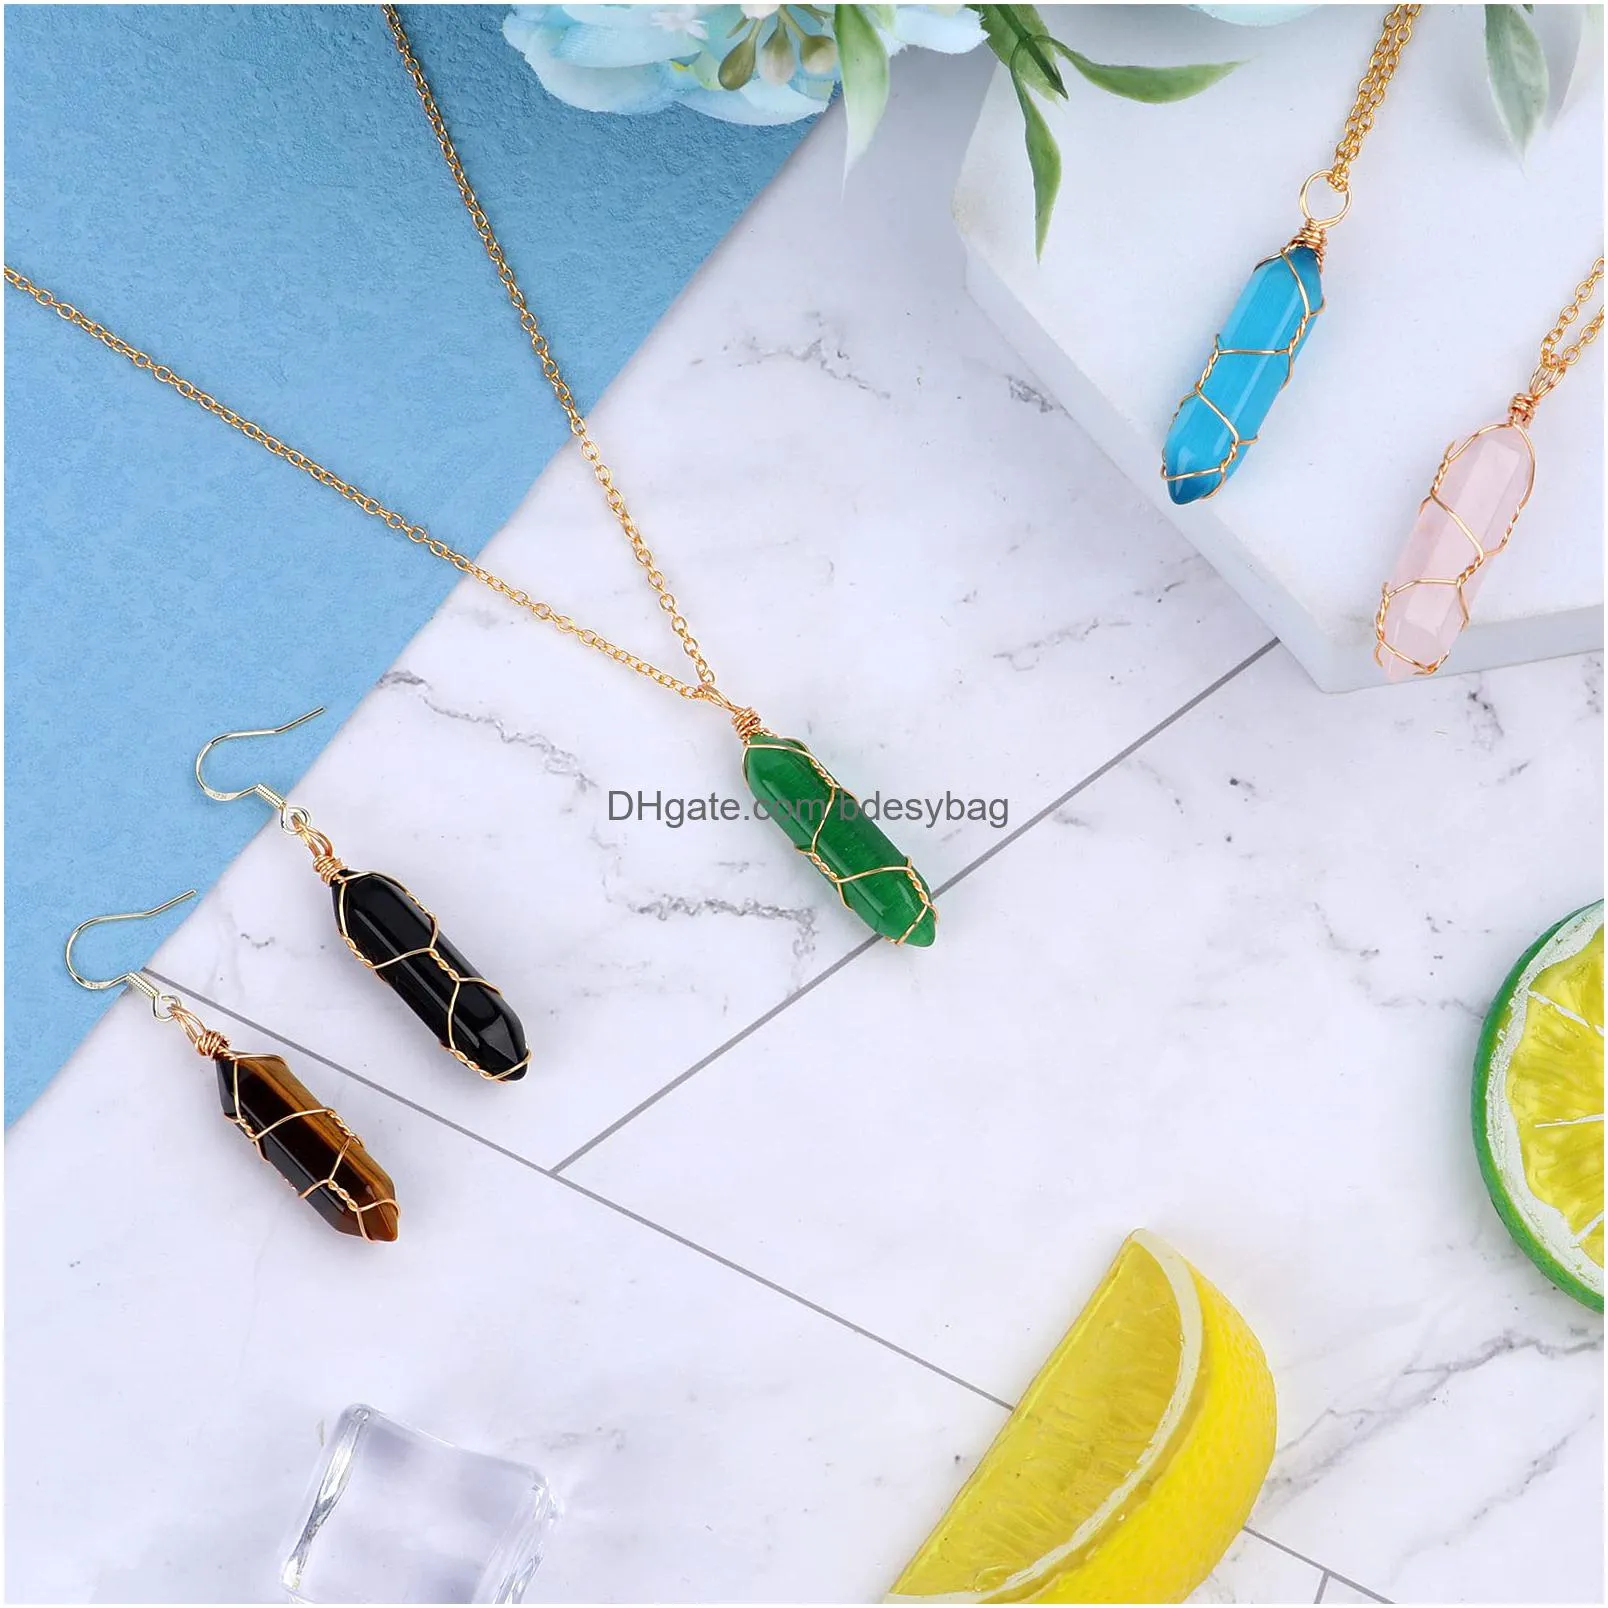 ioffersuper hexagonal crystal pendants necklace accessories including wire wrapped gemstone pendants necklace bulk chains earring for women girls jewelry gift making